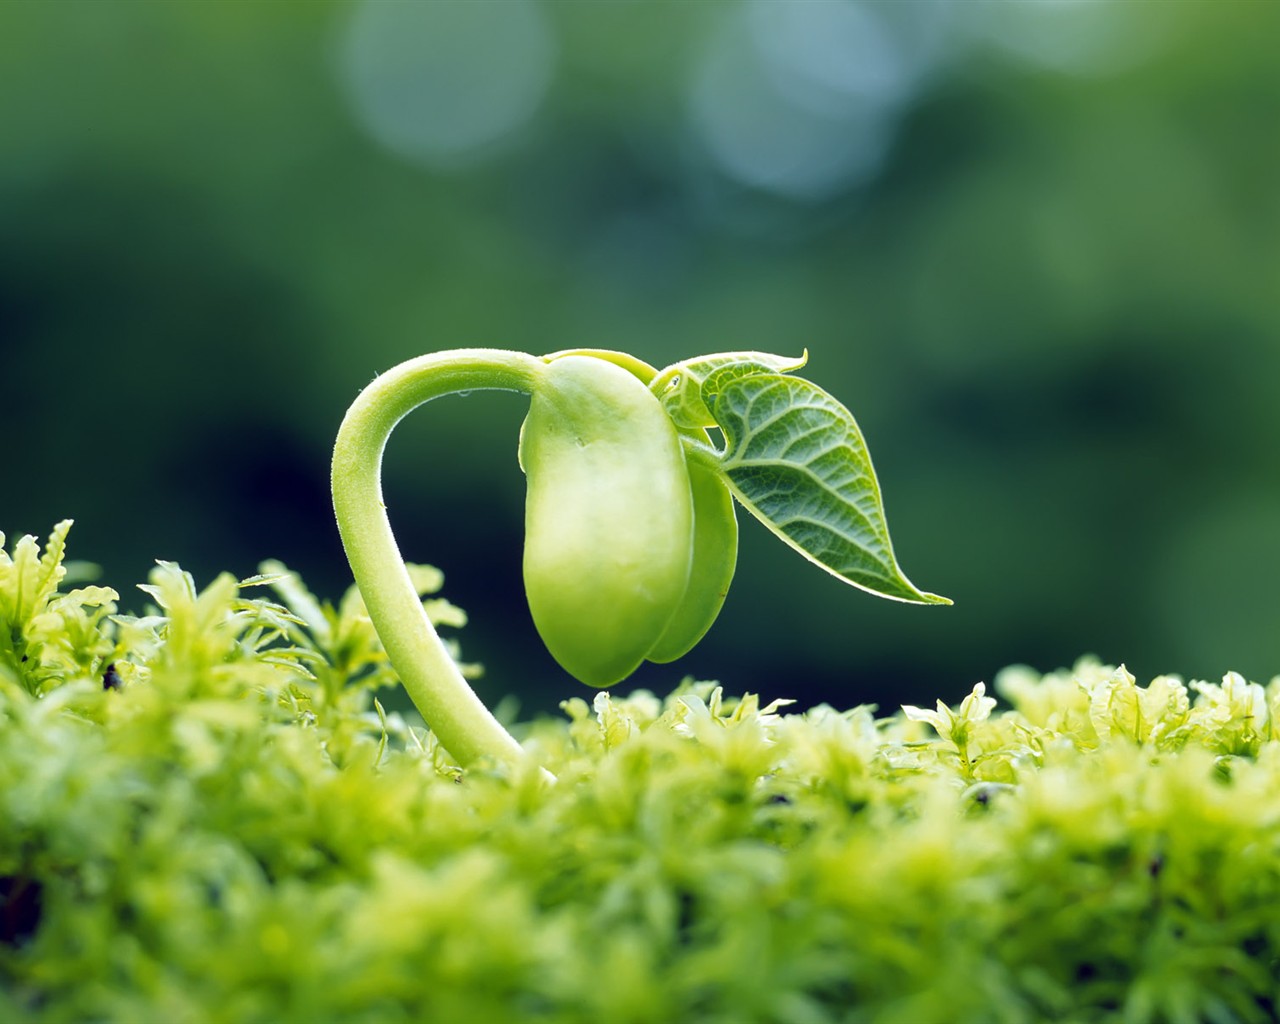 Sprout leaves HD Wallpaper (2) #40 - 1280x1024